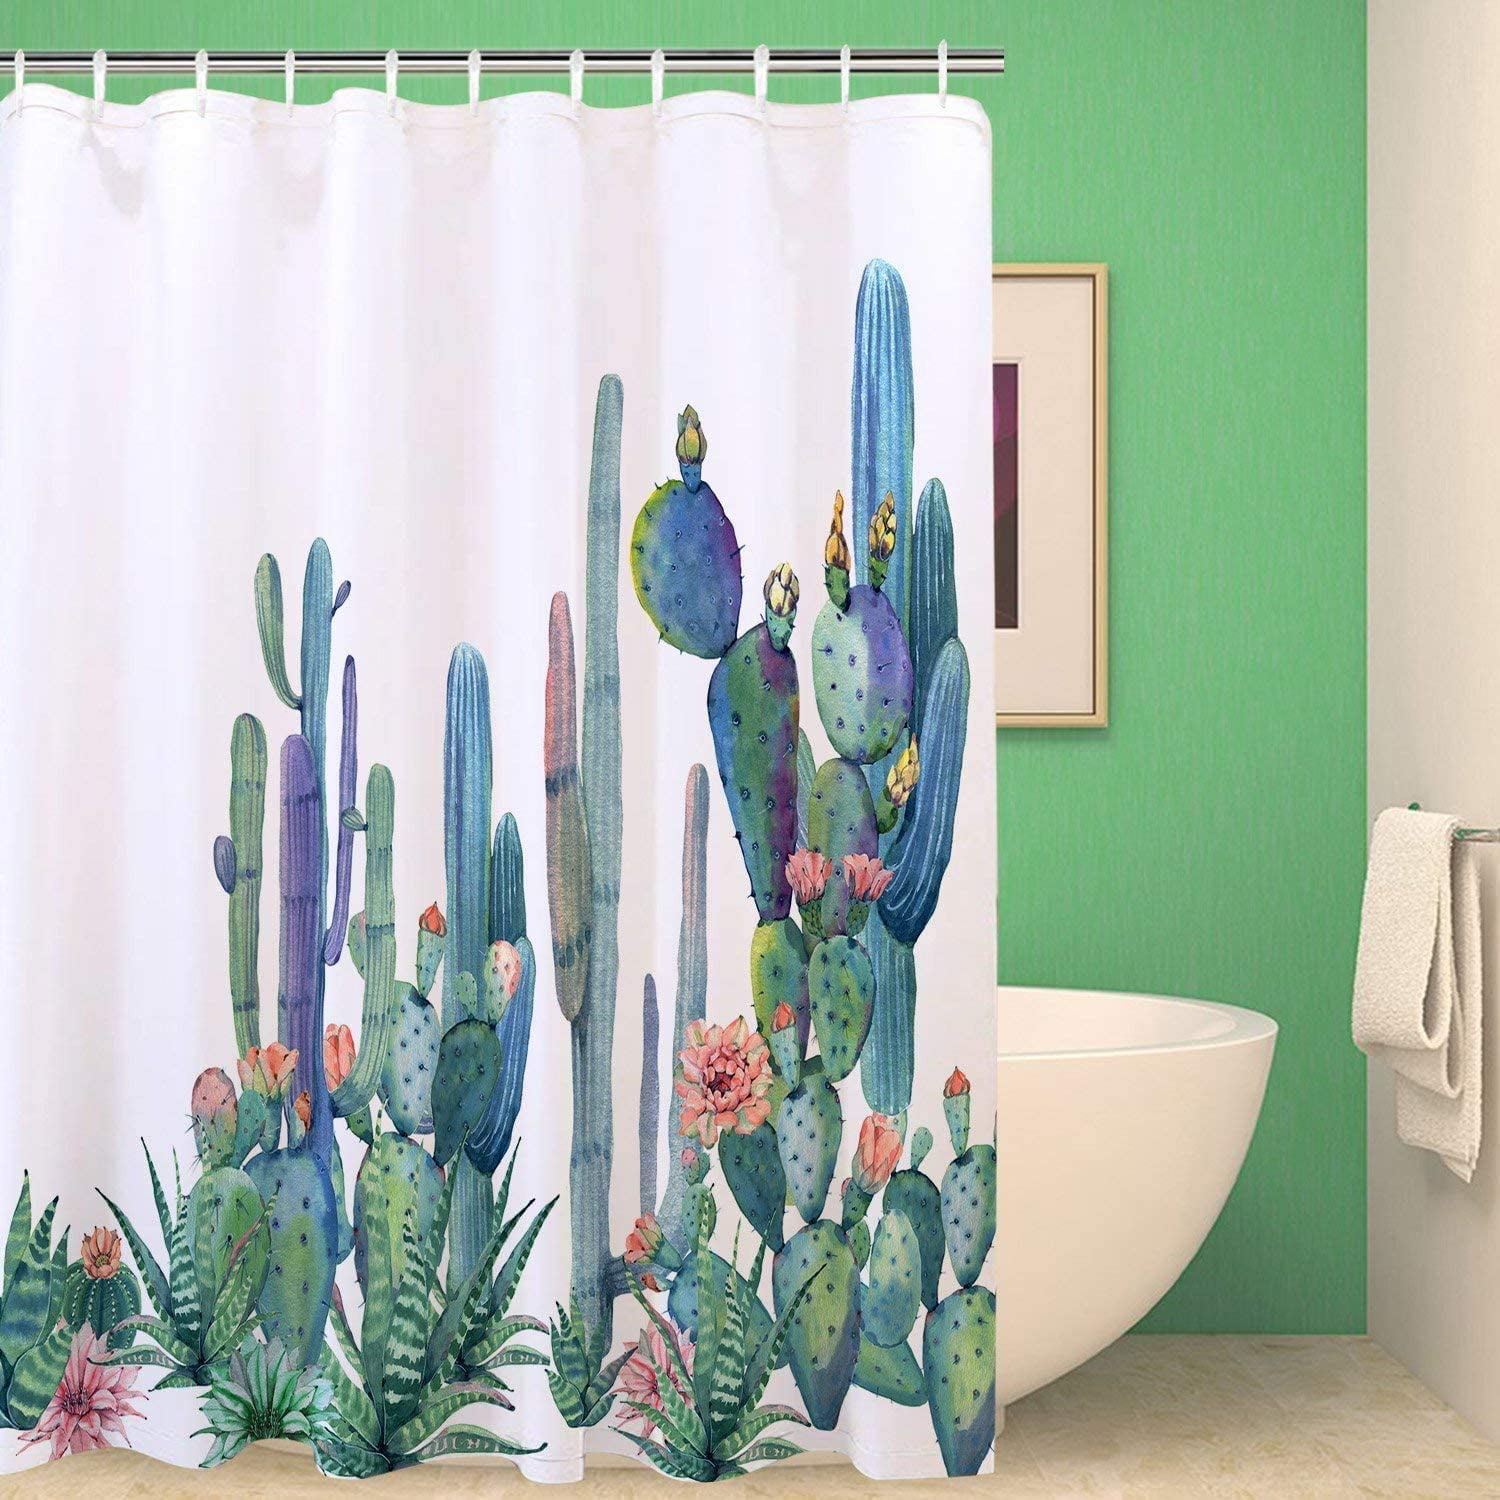 Succulent Plants Cactus Waterproof Bathroom Shower Curtain with Hooks 69x70 inch 